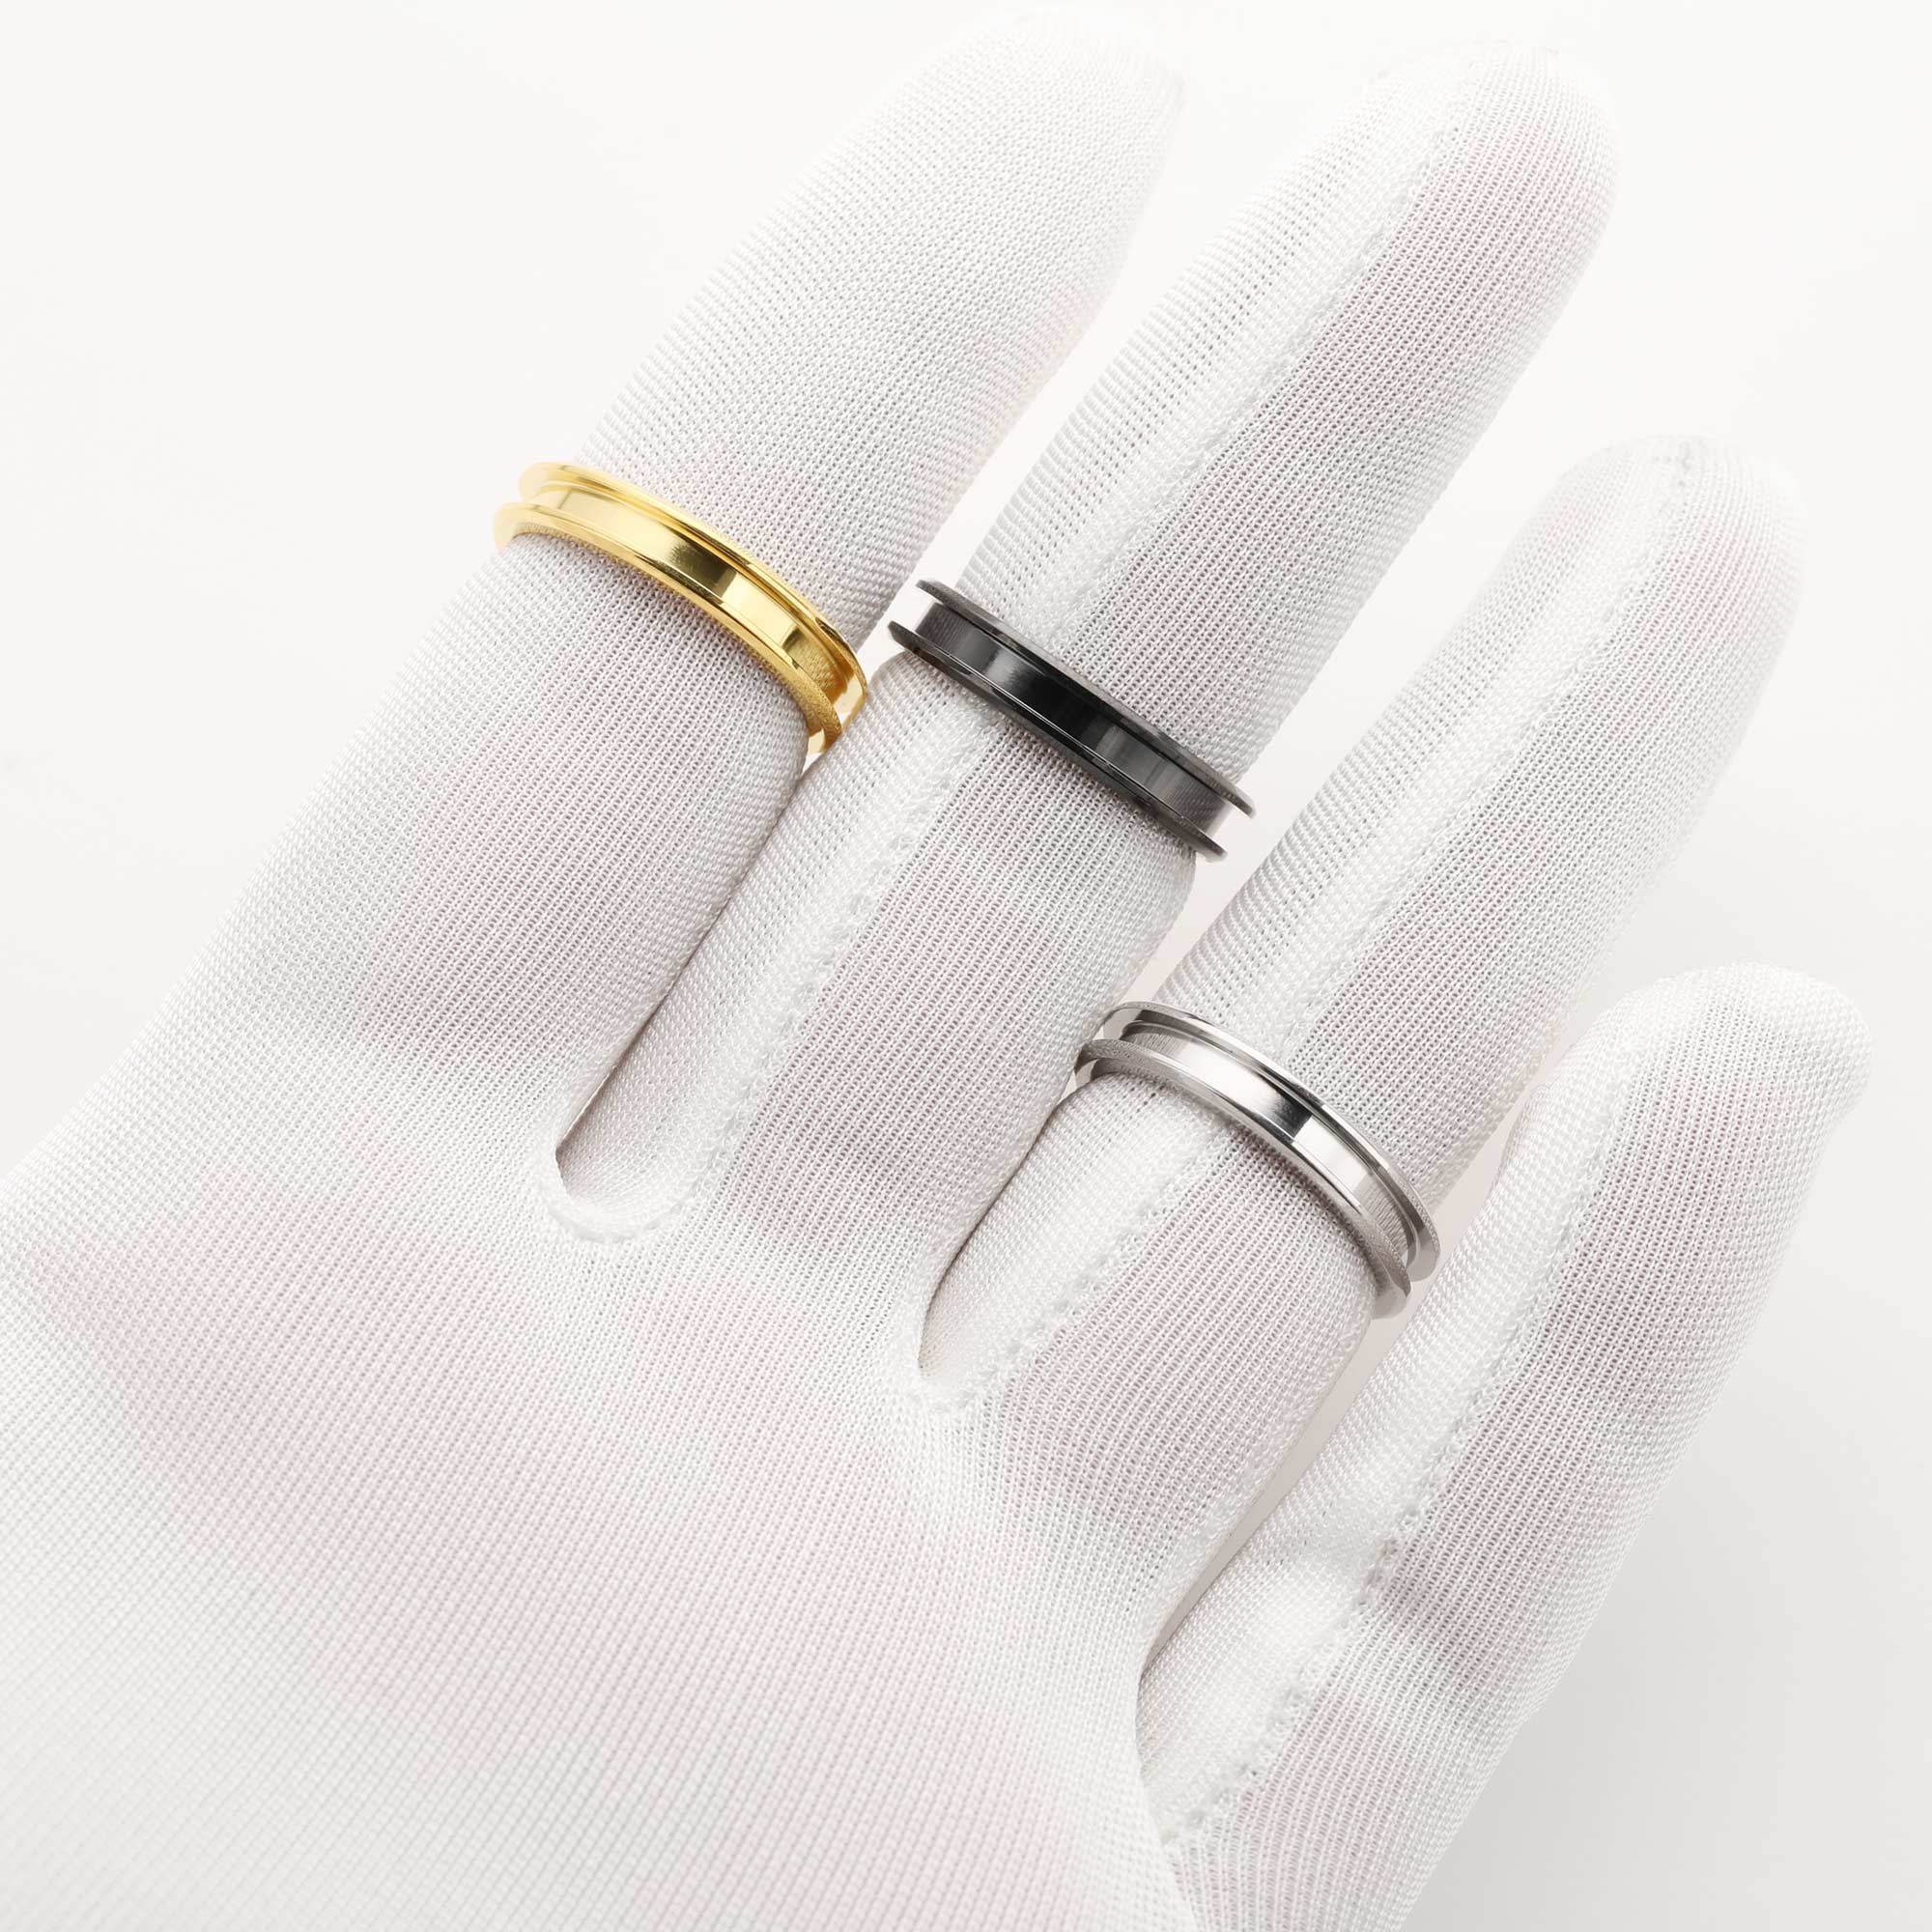 2MM Keepsake Breast Milk Resin Ashes Channel Ring Settings,Channel Bezel Stainless Steel Ring Settings,Silver Gold Black Stainless Steel Ring,DIY Jewelry Supplies 1294593 - Click Image to Close